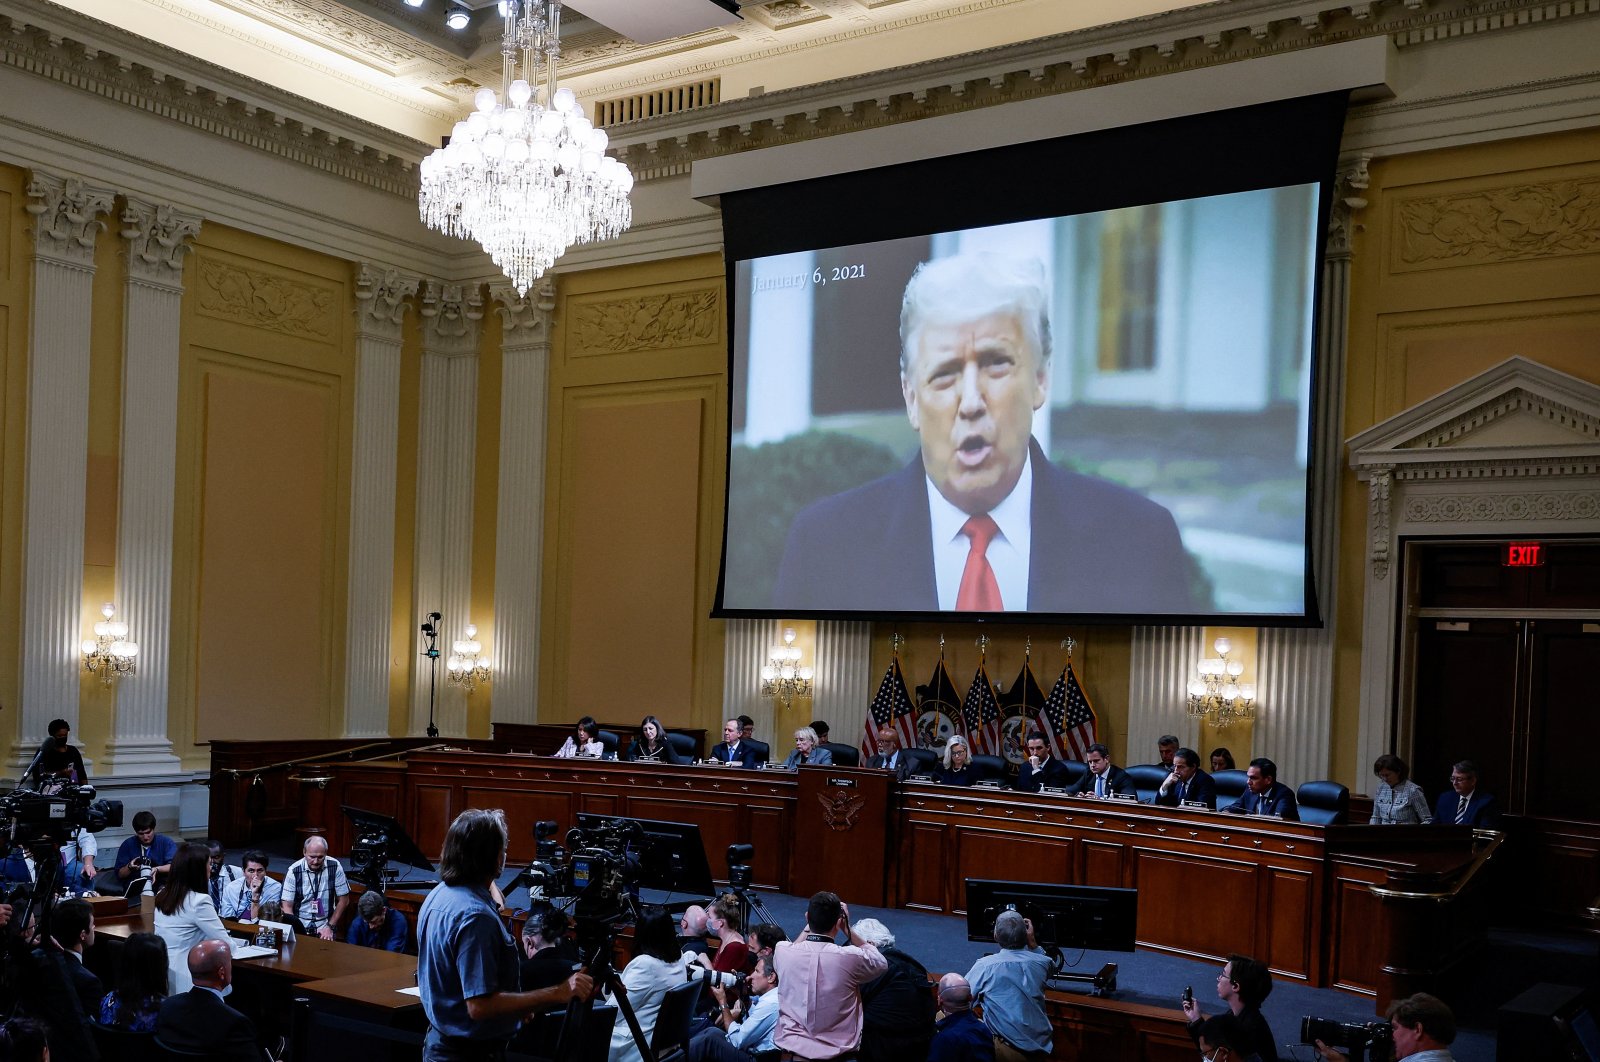 A video of former U.S. President Donald Trump is played as Cassidy Hutchinson, who was an aide to former White House Chief of Staff Mark Meadows during the Trump administration, testifies during a House Select Committee public hearing that investigates the Jan. 6 attack on the U.S. Capitol, Washington, U.S., June 28, 2022. (Reuters Photo)